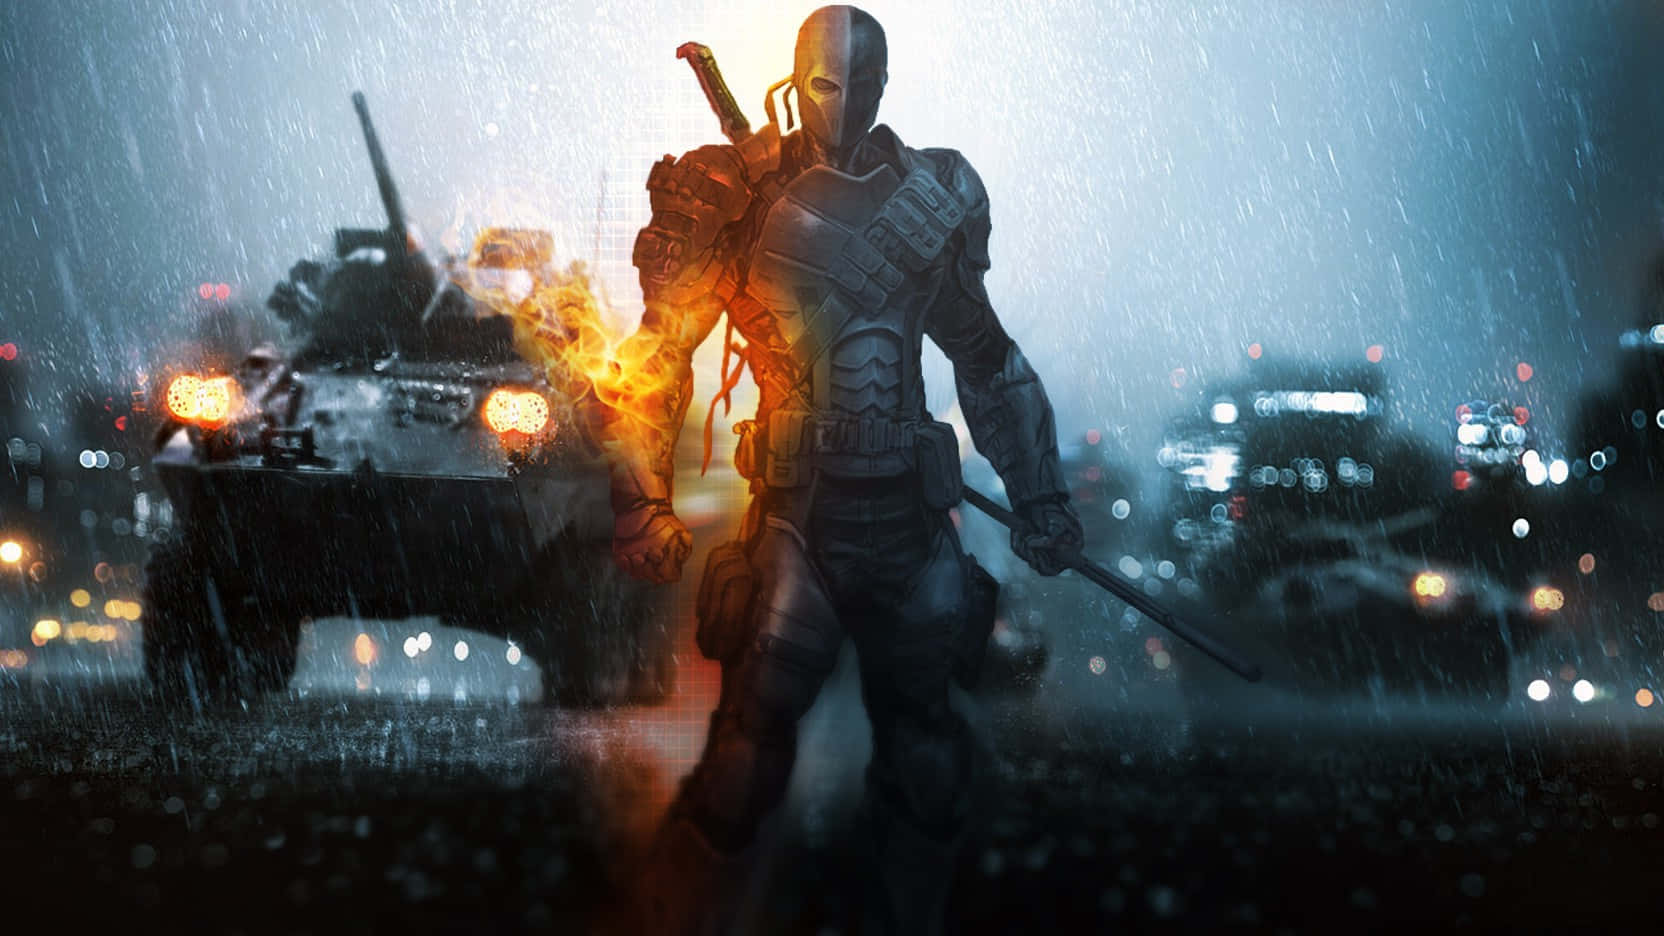 Deathstroke, the infamous assassin